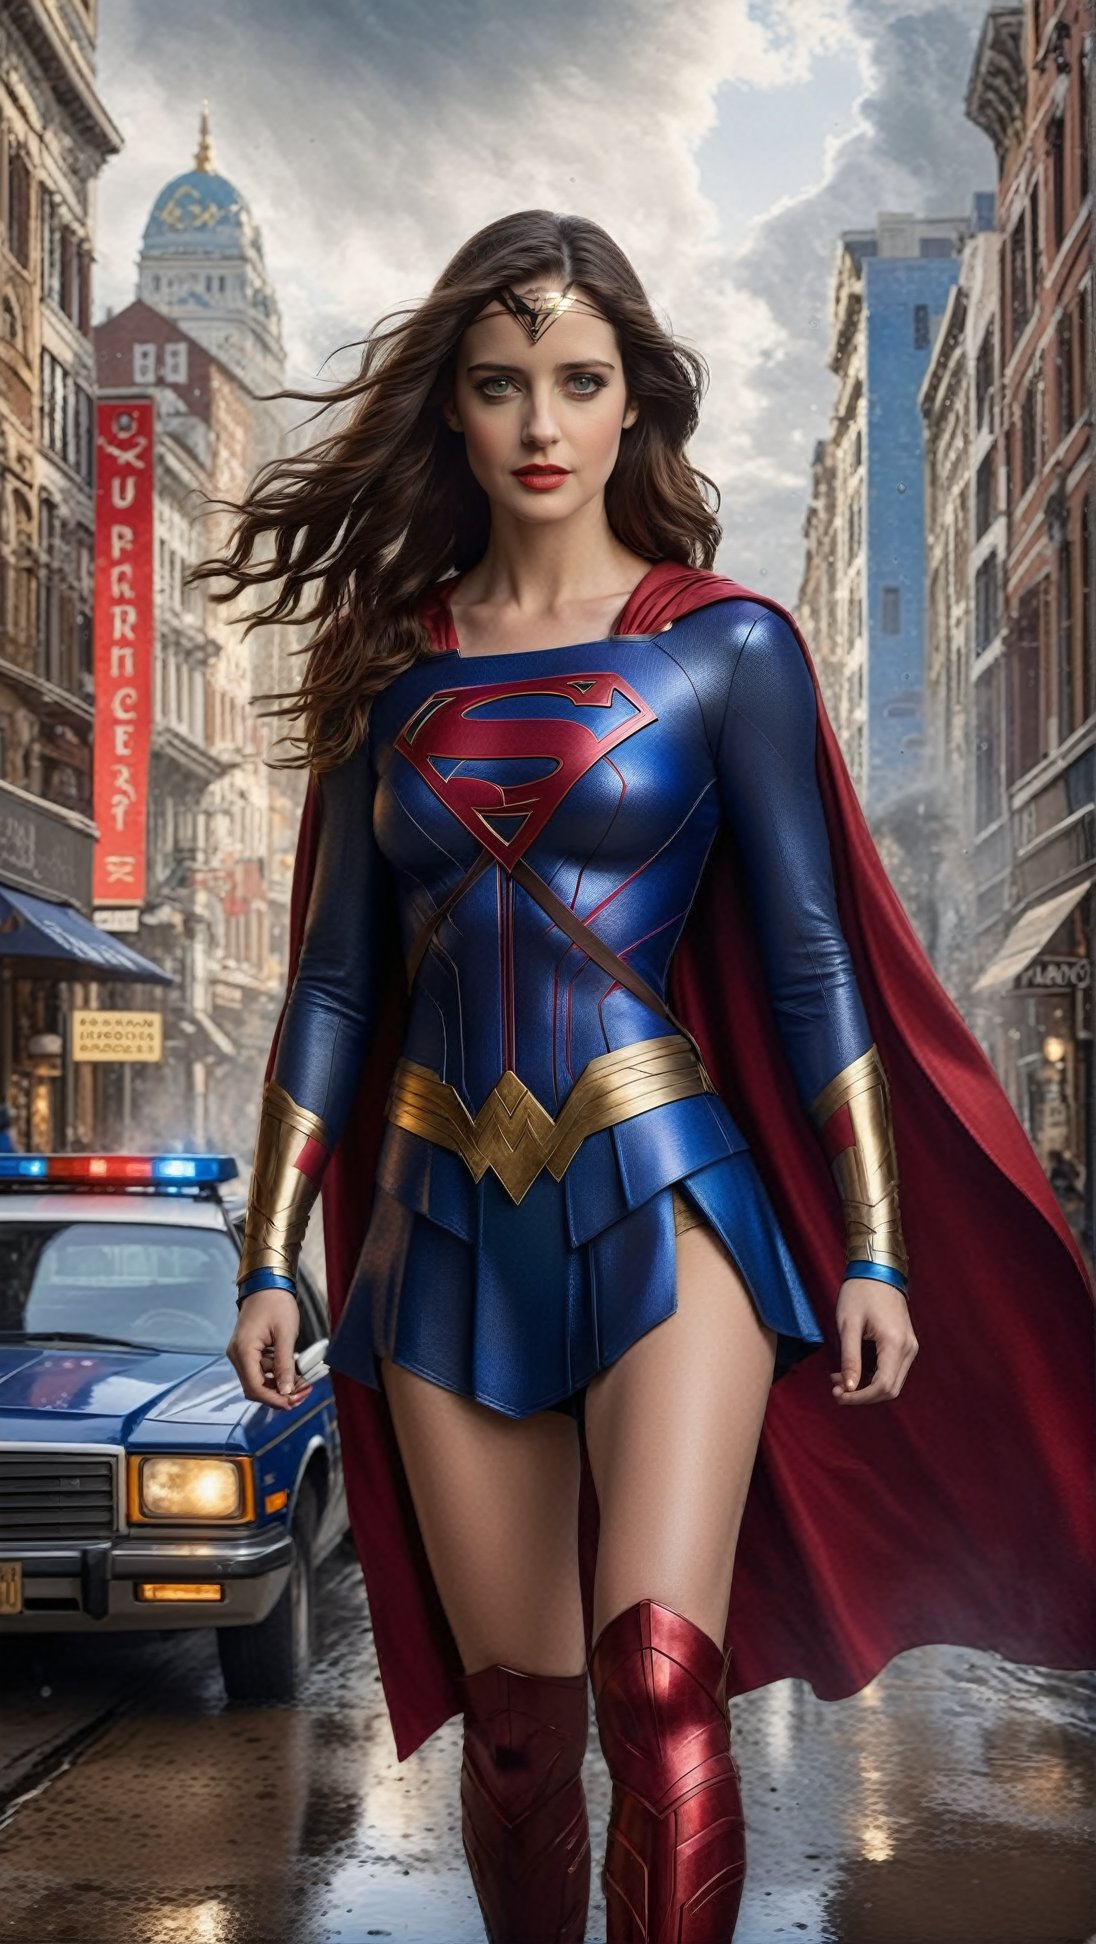 Hyper-Realistic photo of a beautiful Supergirl standing in a street,20yo,1girl,solo,Supergirl costume with big S mark,cape,detailed exquisite face,looking at viewer,Eva Green lookalike
BREAK
backdrop:city street,police car,puddles,cluttered maximalism
BREAK
settings: (rule of thirds1.3),perfect composition,studio photo,trending on artstation,depth of perspective,(Masterpiece,Best quality,32k,UHD:1.4),(sharp focus,high contrast,HDR,hyper-detailed,intricate details,ultra-realistic,kodachrome 800:1.3),(chiaroscuro lighting:1.3),(by Karol Bak $,Alessandro Pautasso $,Gustav Klimt $ and Hayao Miyazaki $:1.3),art_booster, photo_b00ster,real_booster,wonder-woman-xl